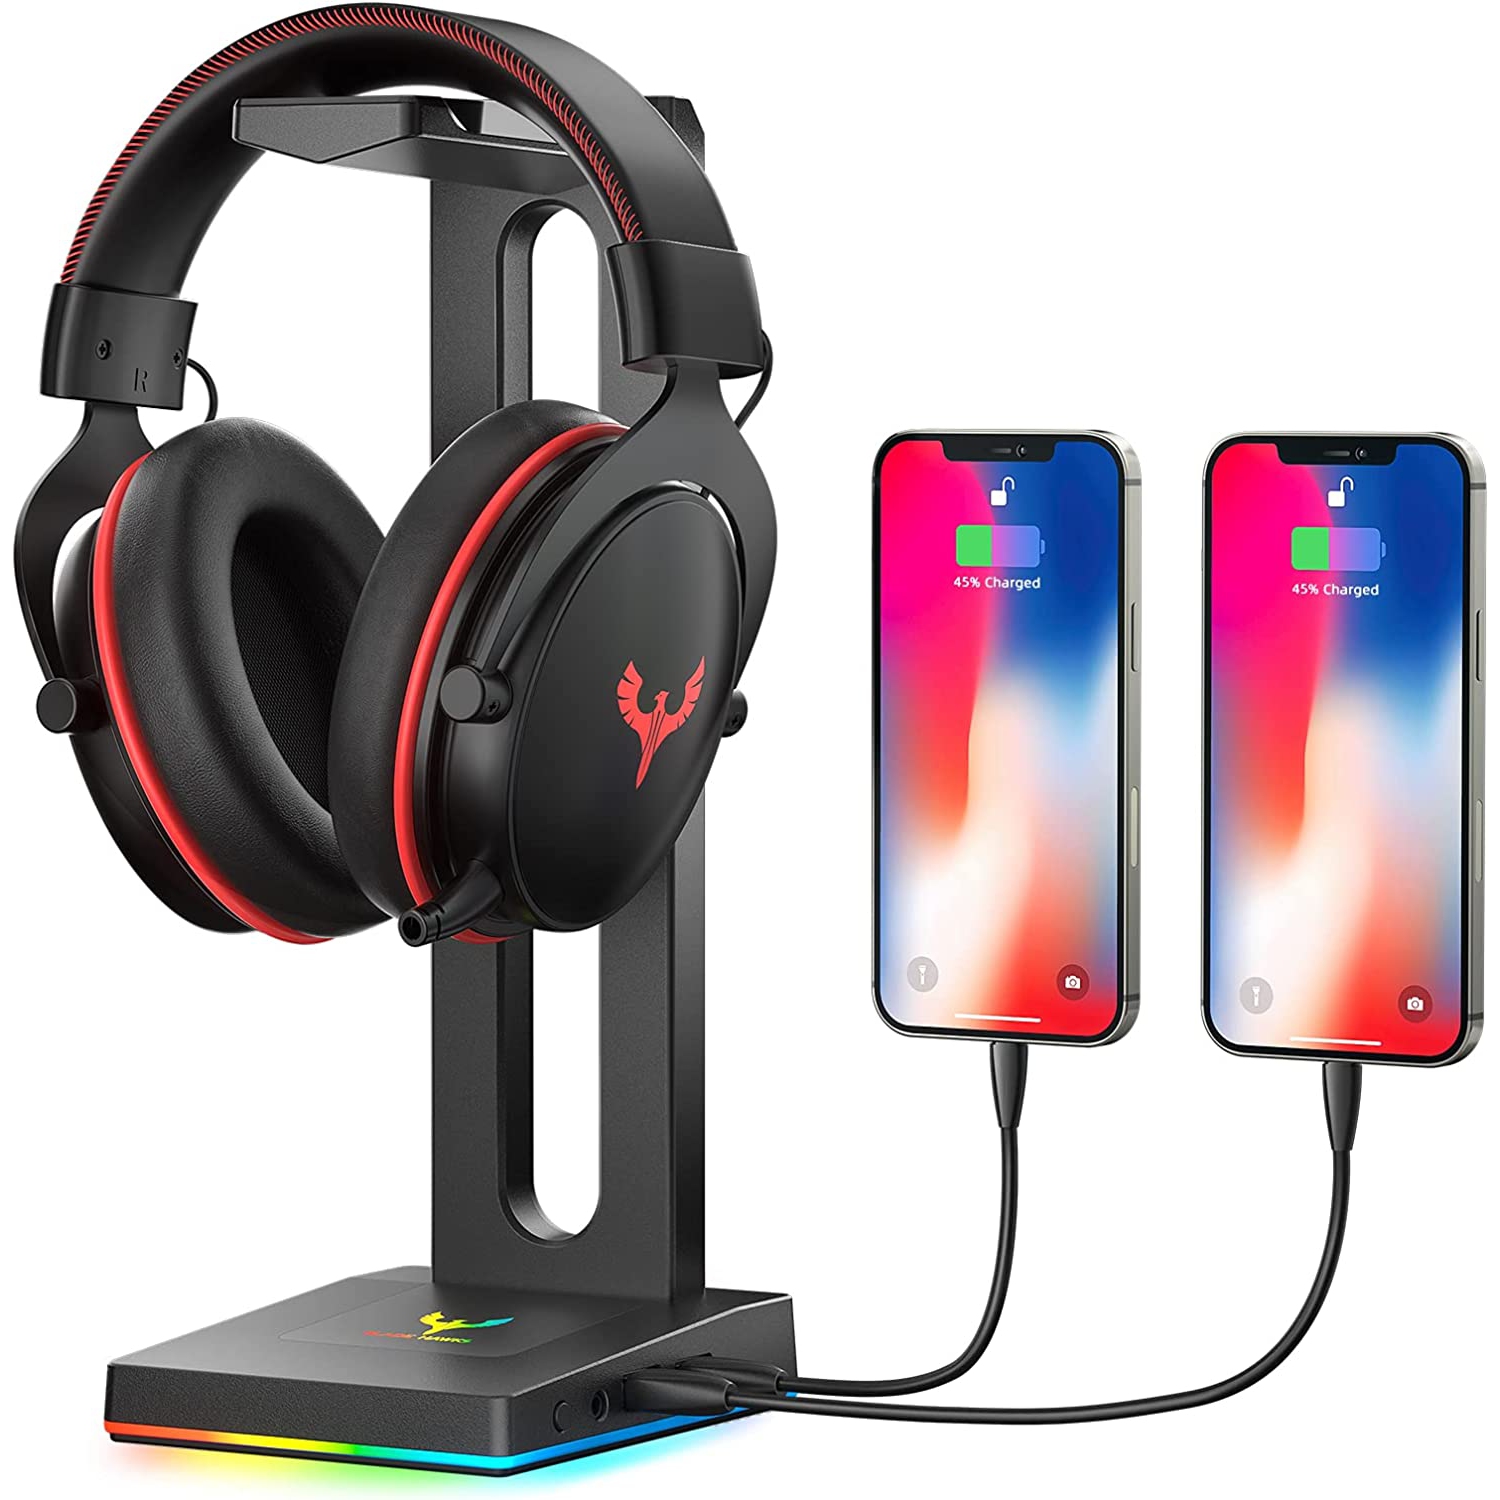 RGB Headphone Stand, Gaming Headphone Stand with 2 USB Charging Ports, 3.5mm Aux Port,Headphone Holder for Gamers Gaming PC Accessories Desk